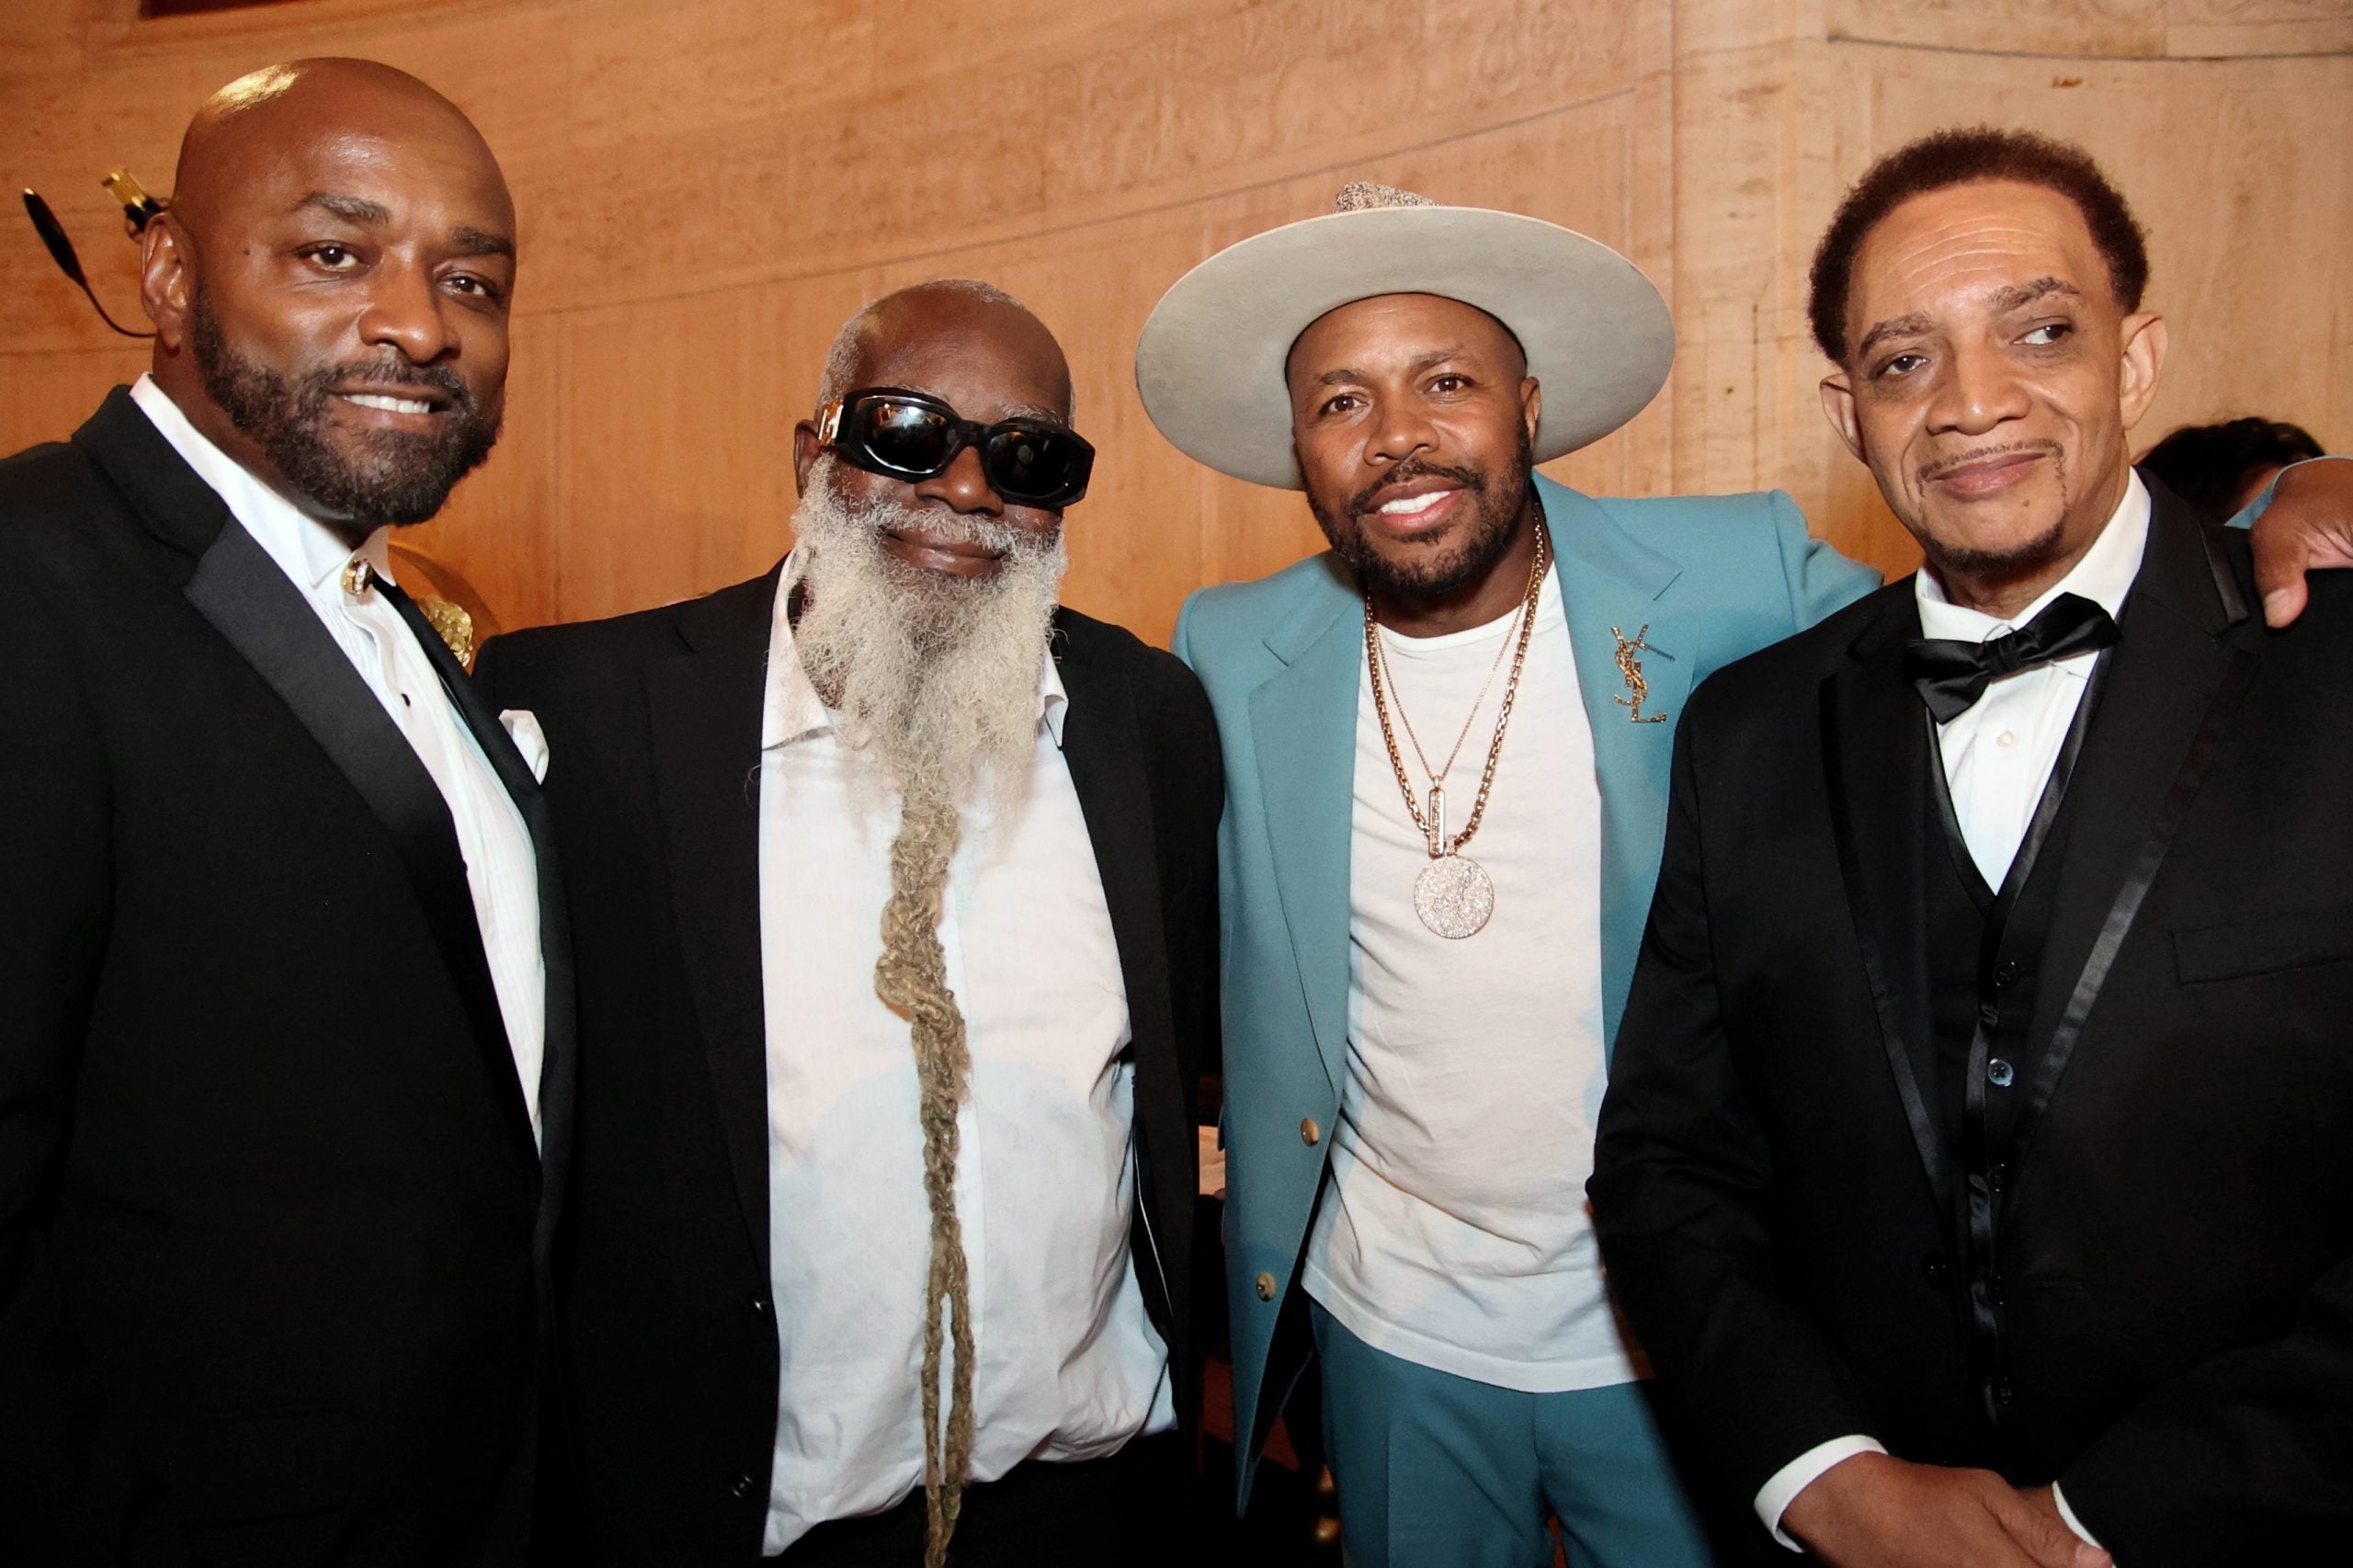 “Hip-Hop Changes Lives”: Check Out Highlights  From The Inaugural Hip-Hop  Museum Benefit Gala